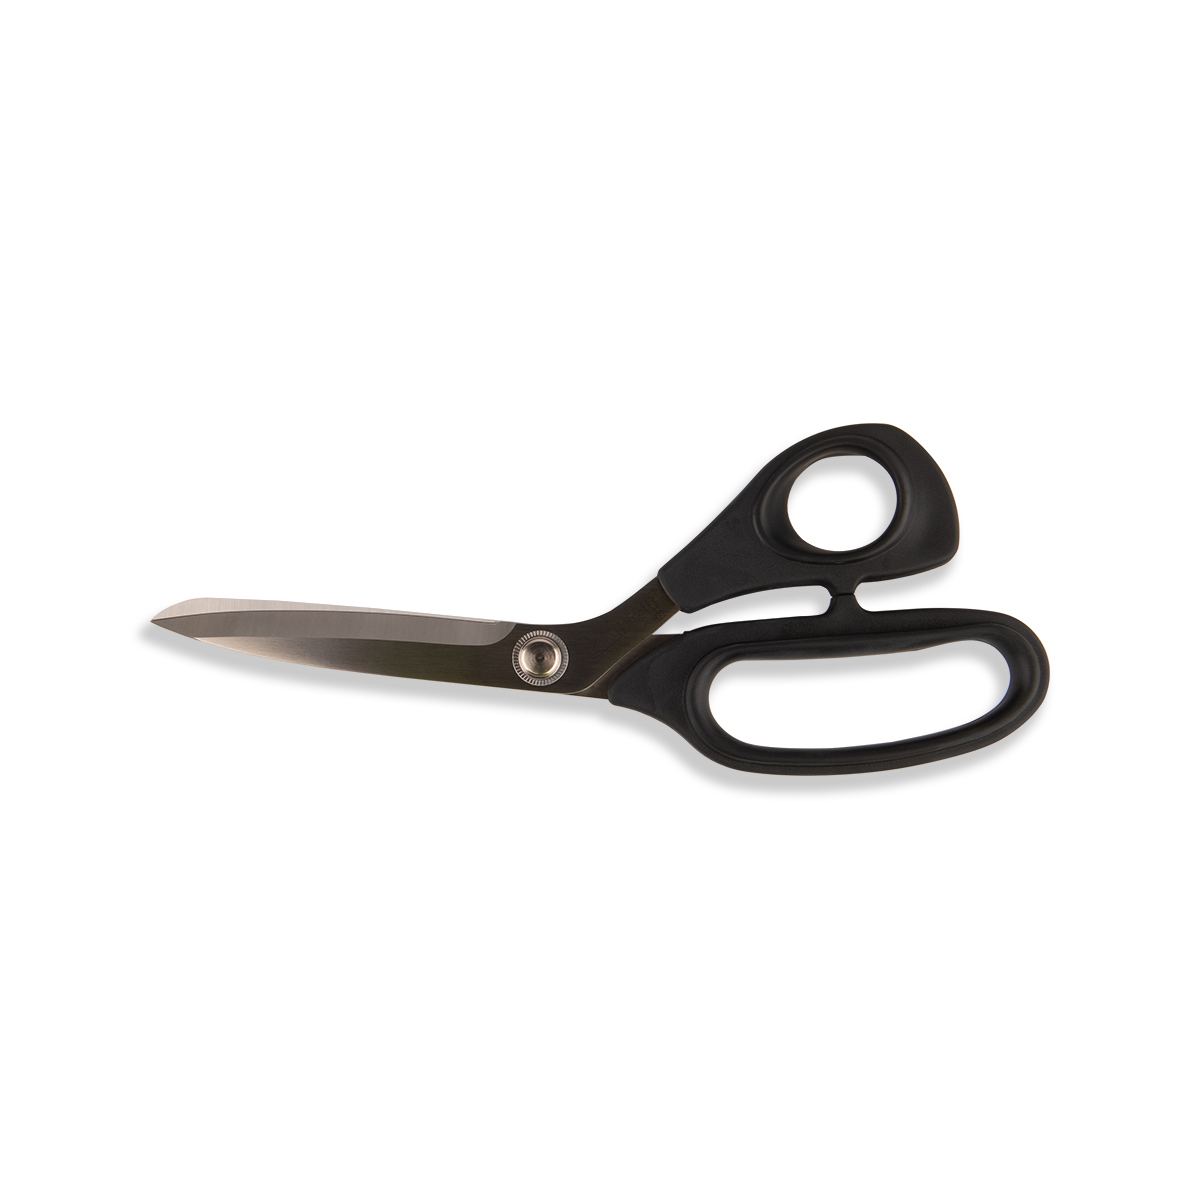 Best Pro Craft Scissors, Shears Sewing Quilting Embroidery